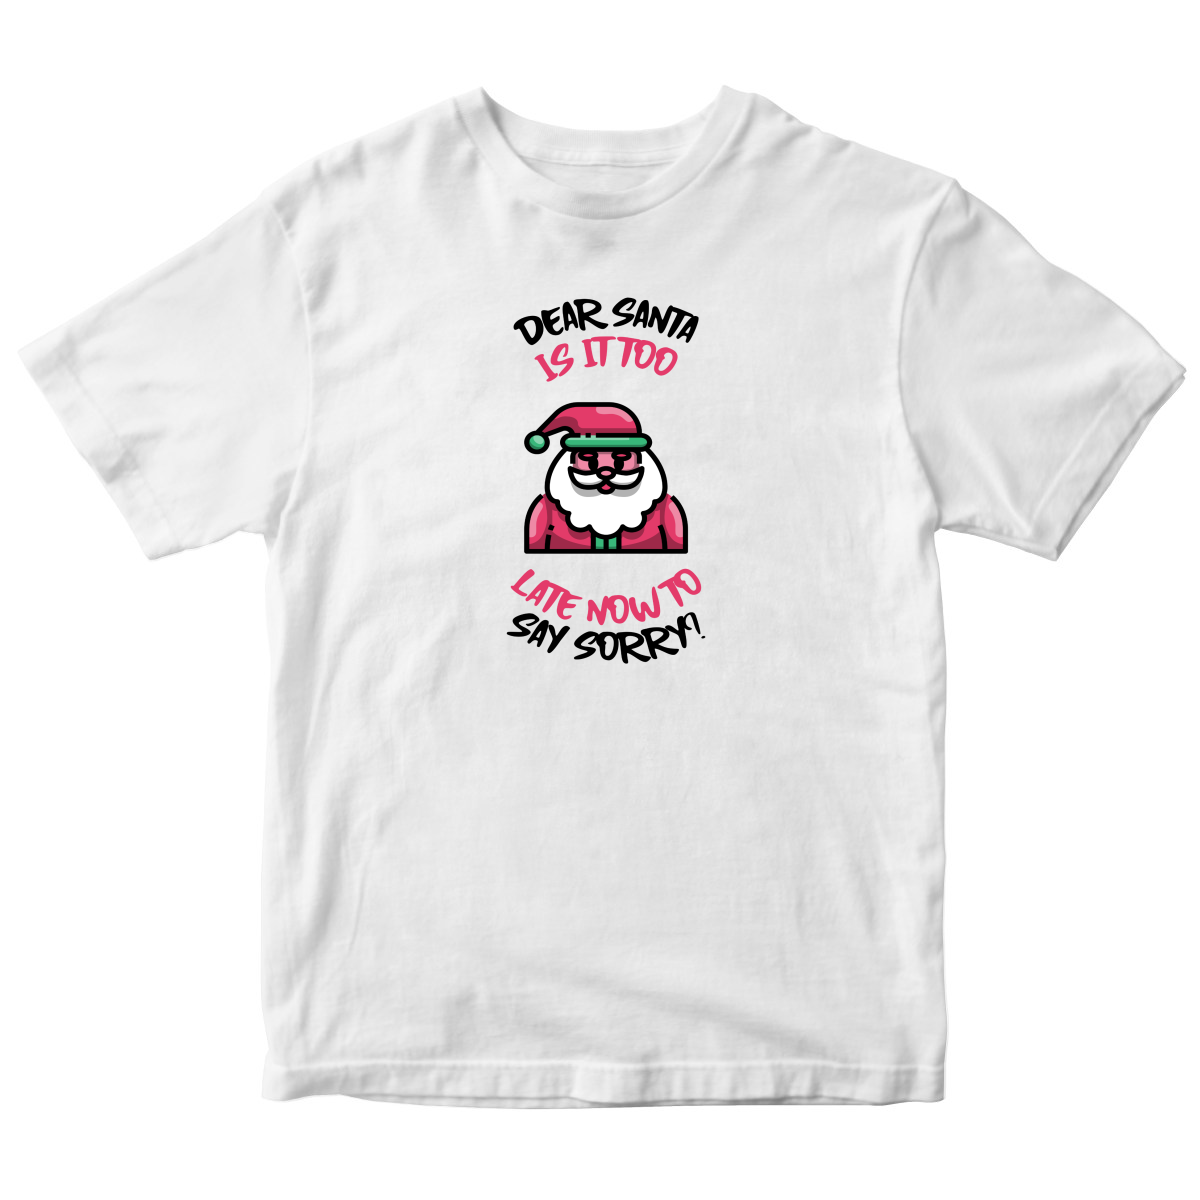 Dear Santa, Is It Too Late to Say Sorry? Kids T-shirt | White